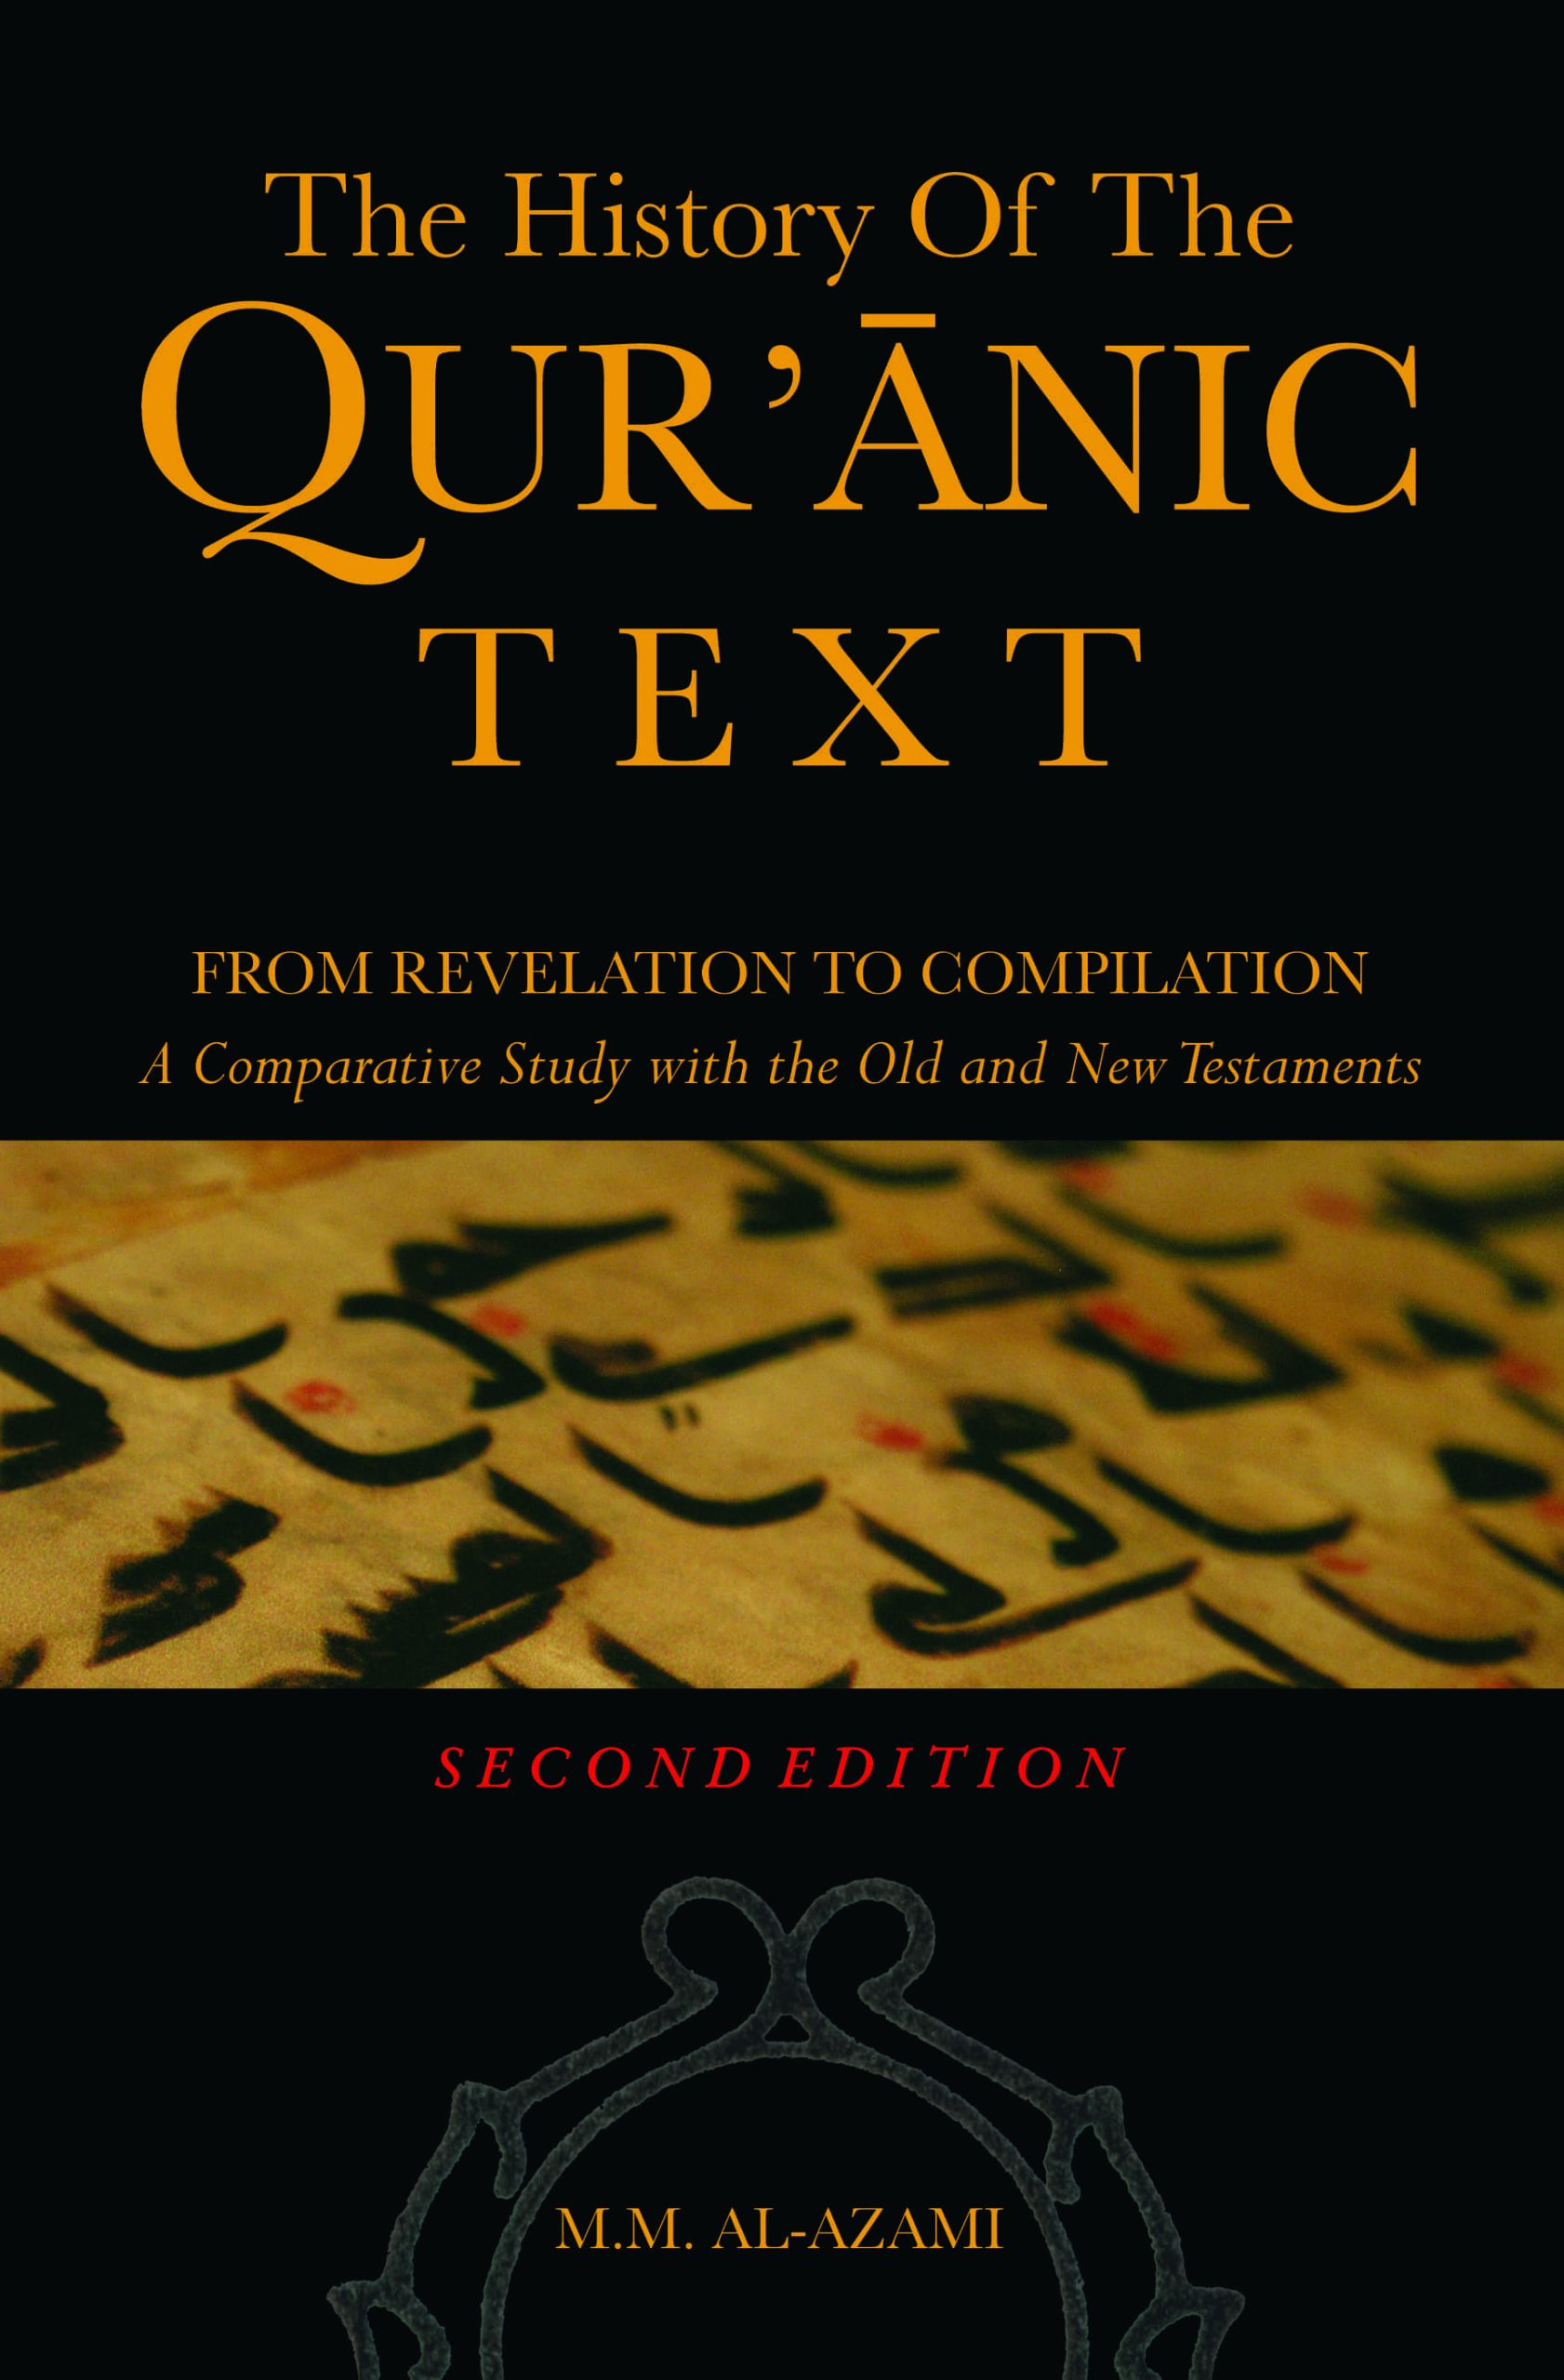 The History of the Qur'anic Text: From revelation to compilation